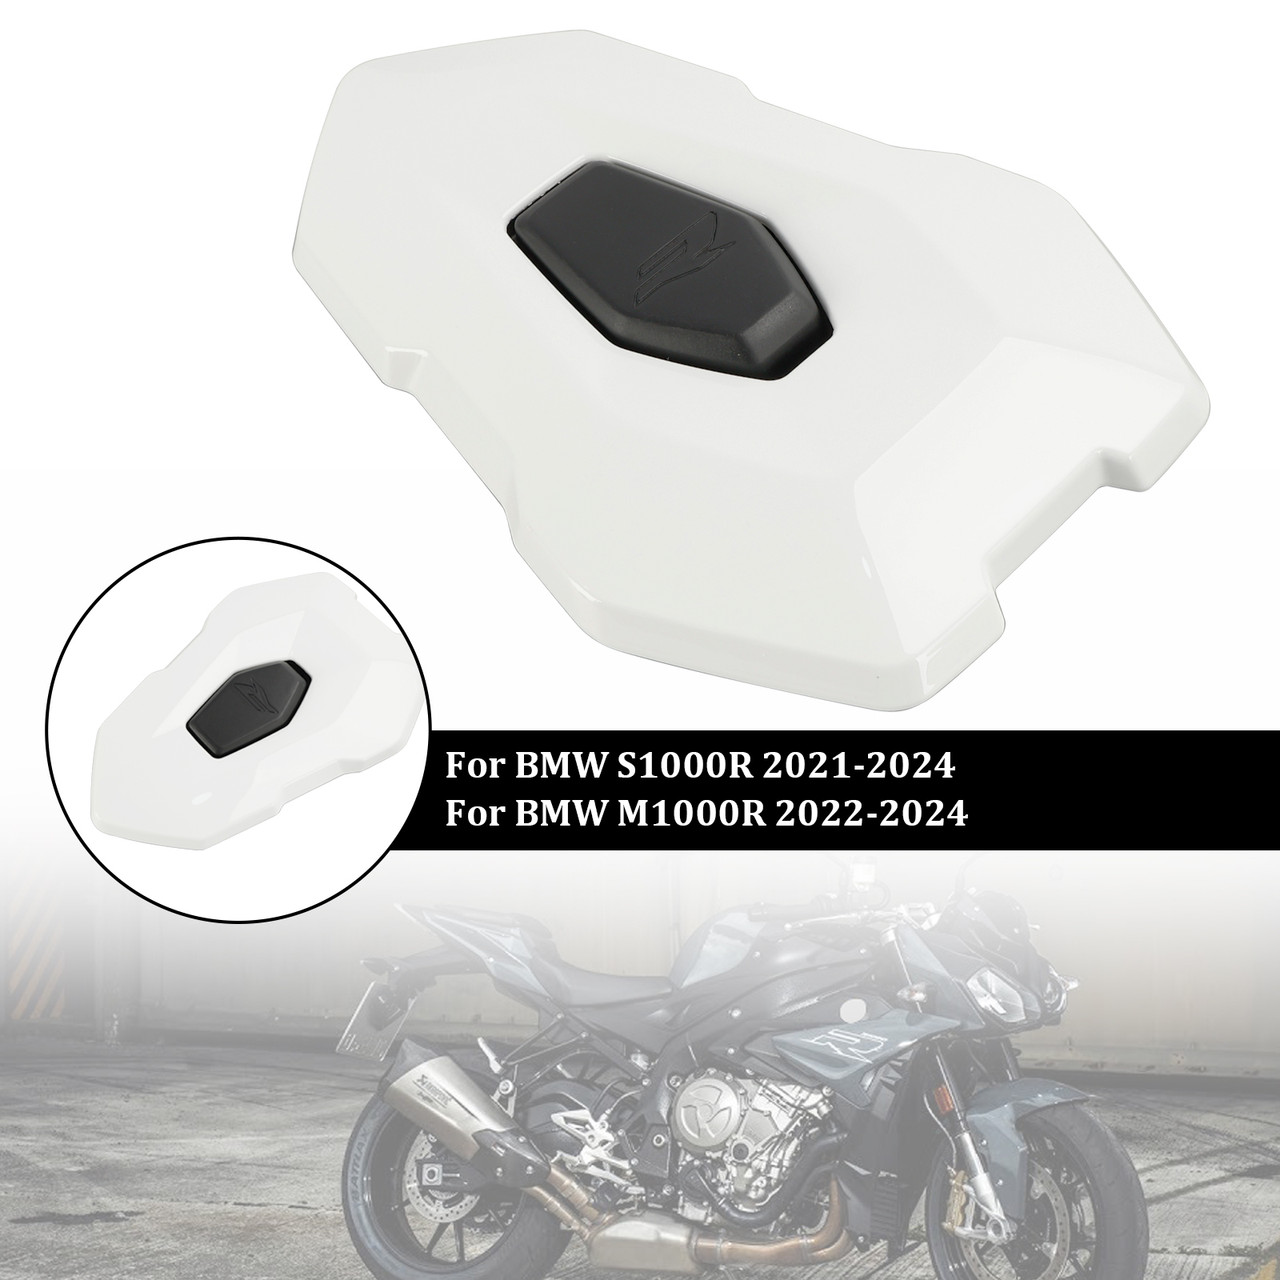 2022-2024 BMW M1000R Tail Rear Seat Cover Fairing Cowl white Generic